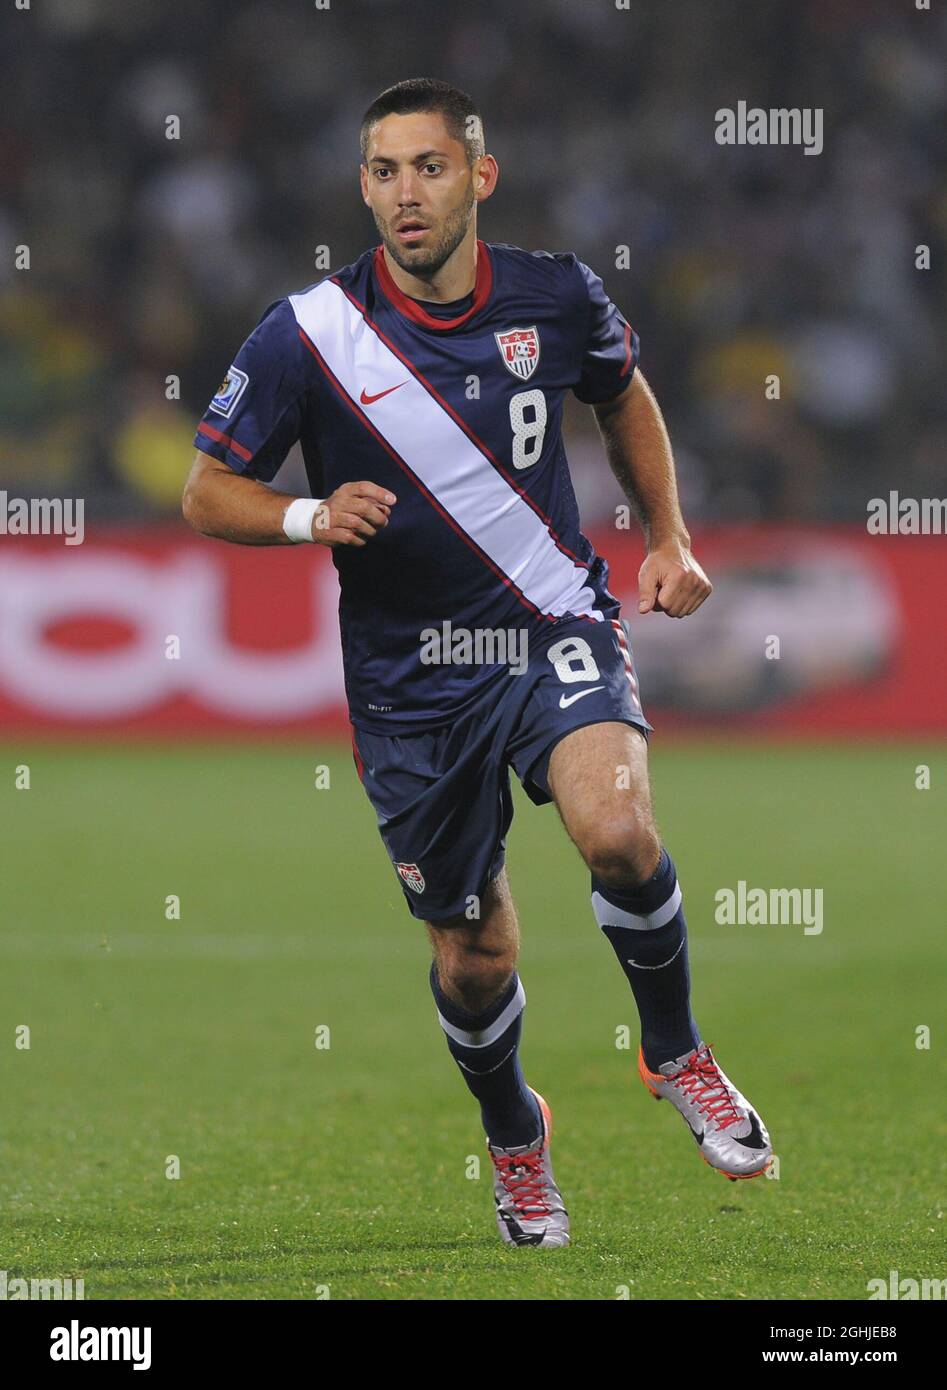 Clint Dempsey of USA during the FIFA World Cup 2010, Group C match